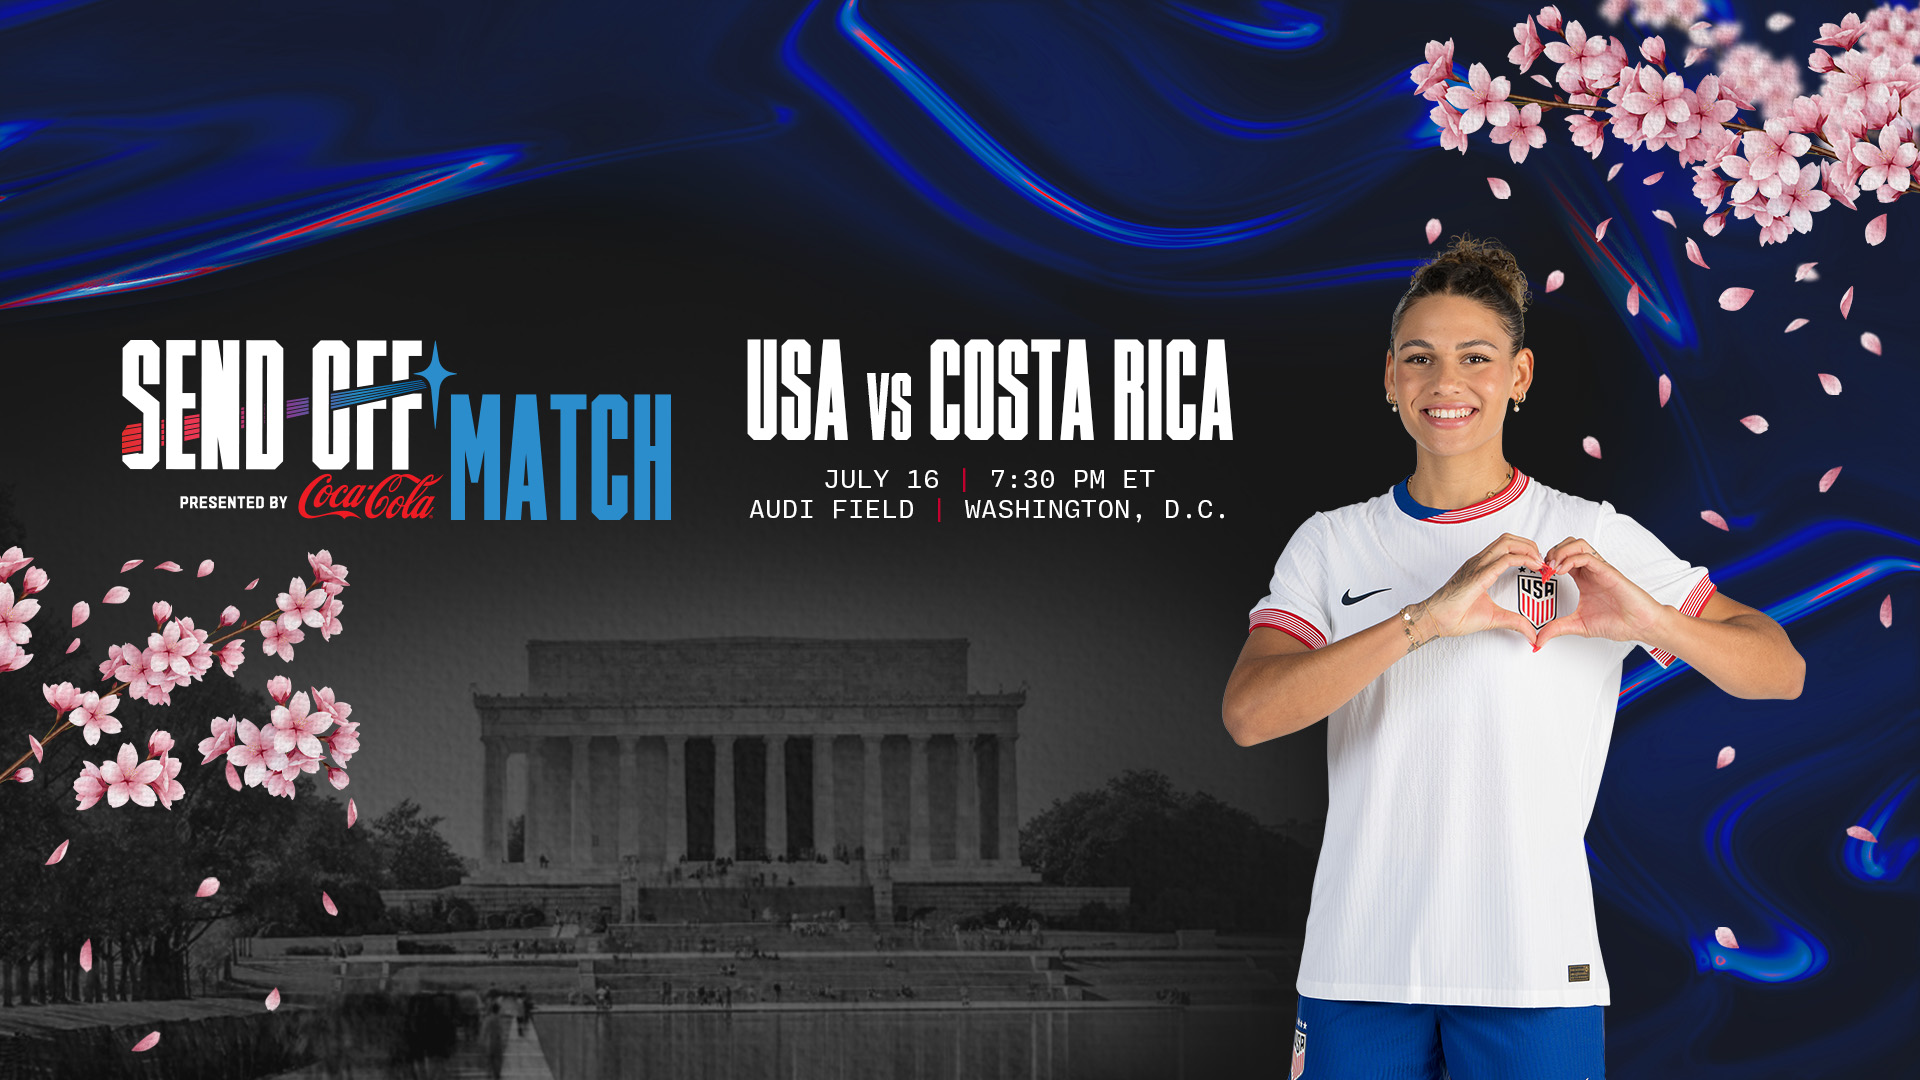 The United States women's national team will play the Olympic kickoff game, presented by Coca-Cola, July 16 in Washington, D.C. against Costa Rica